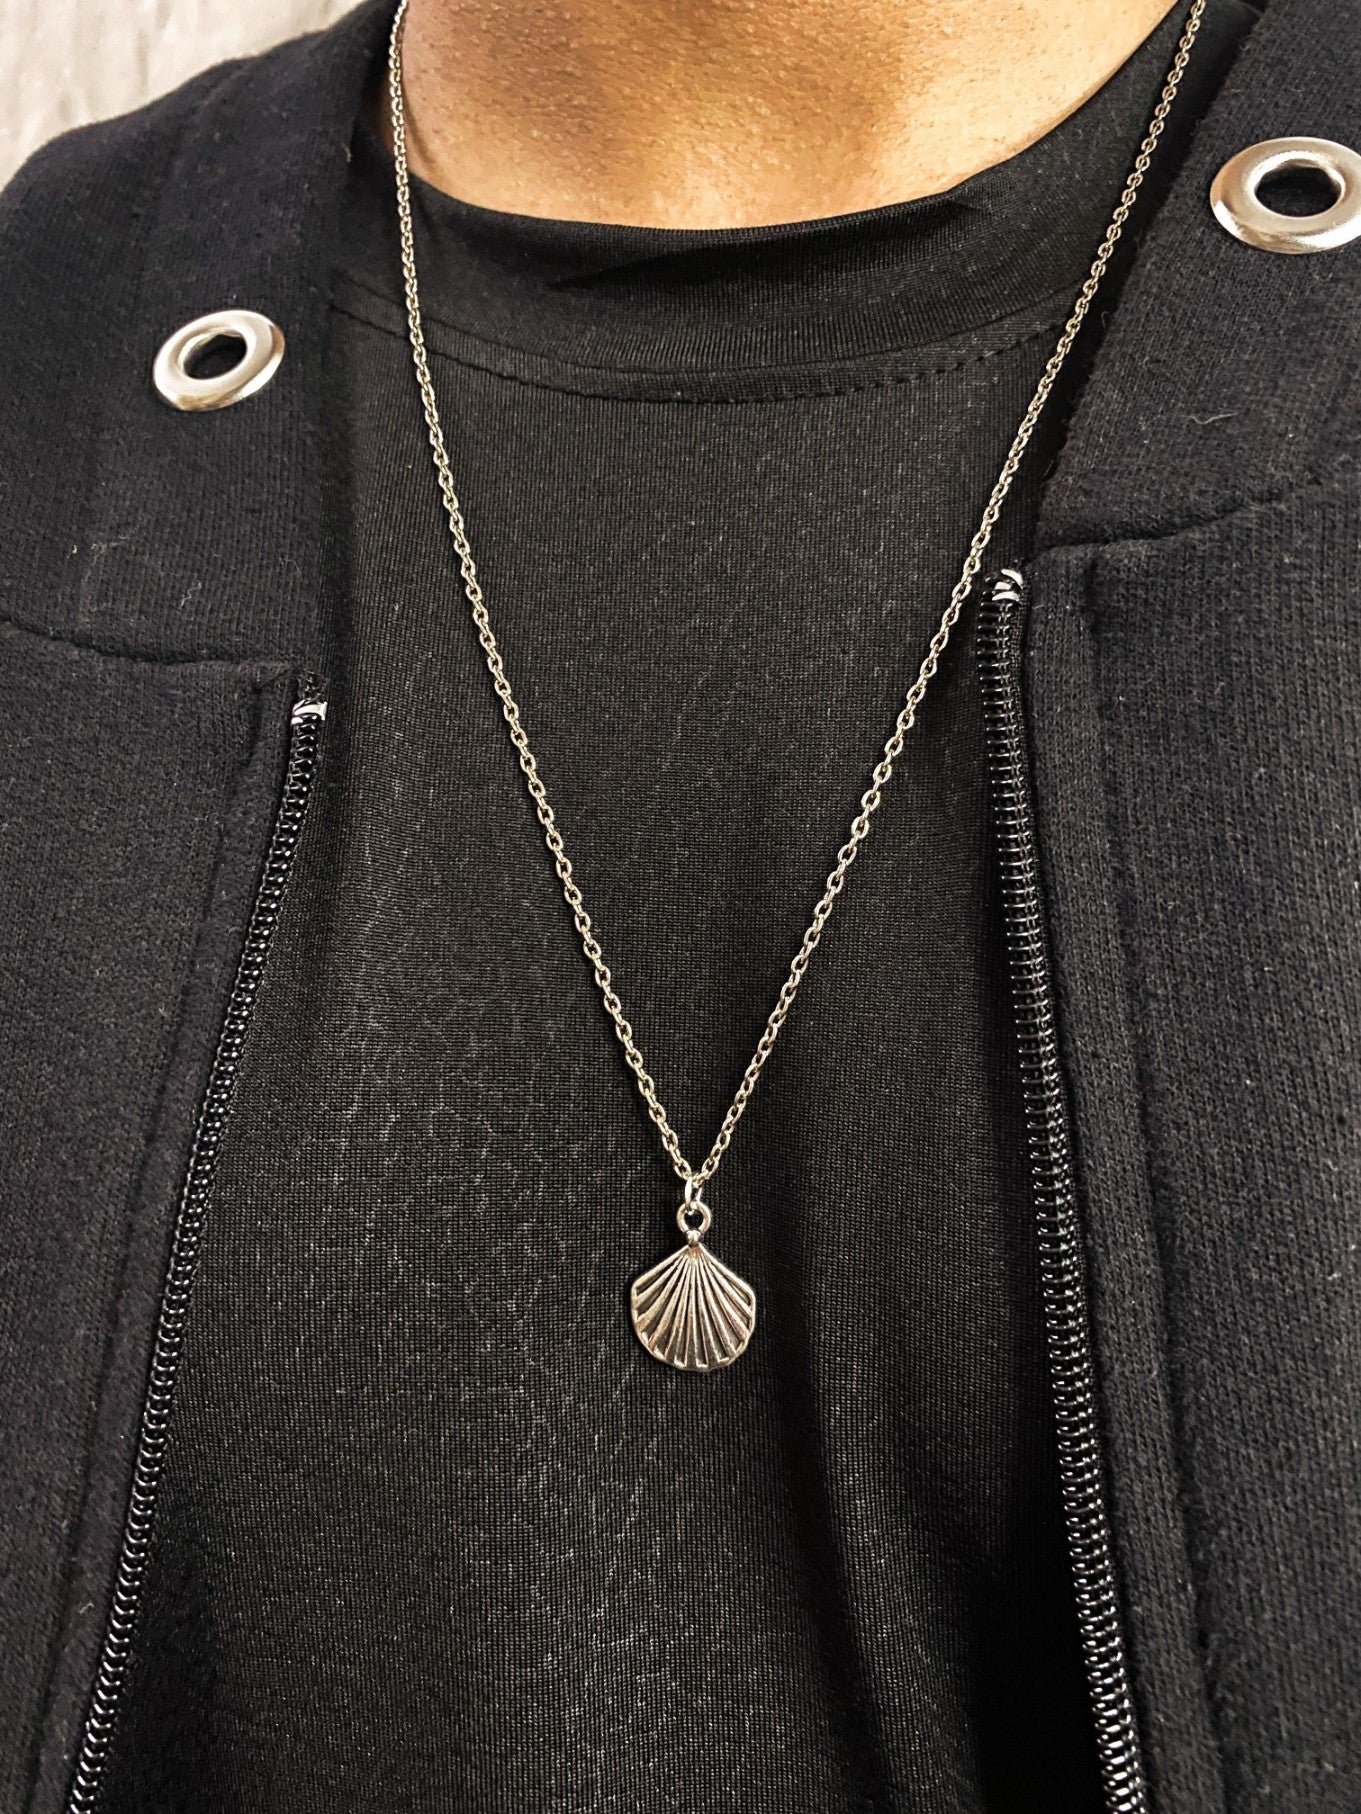 Silver Shell Pendant With Chain